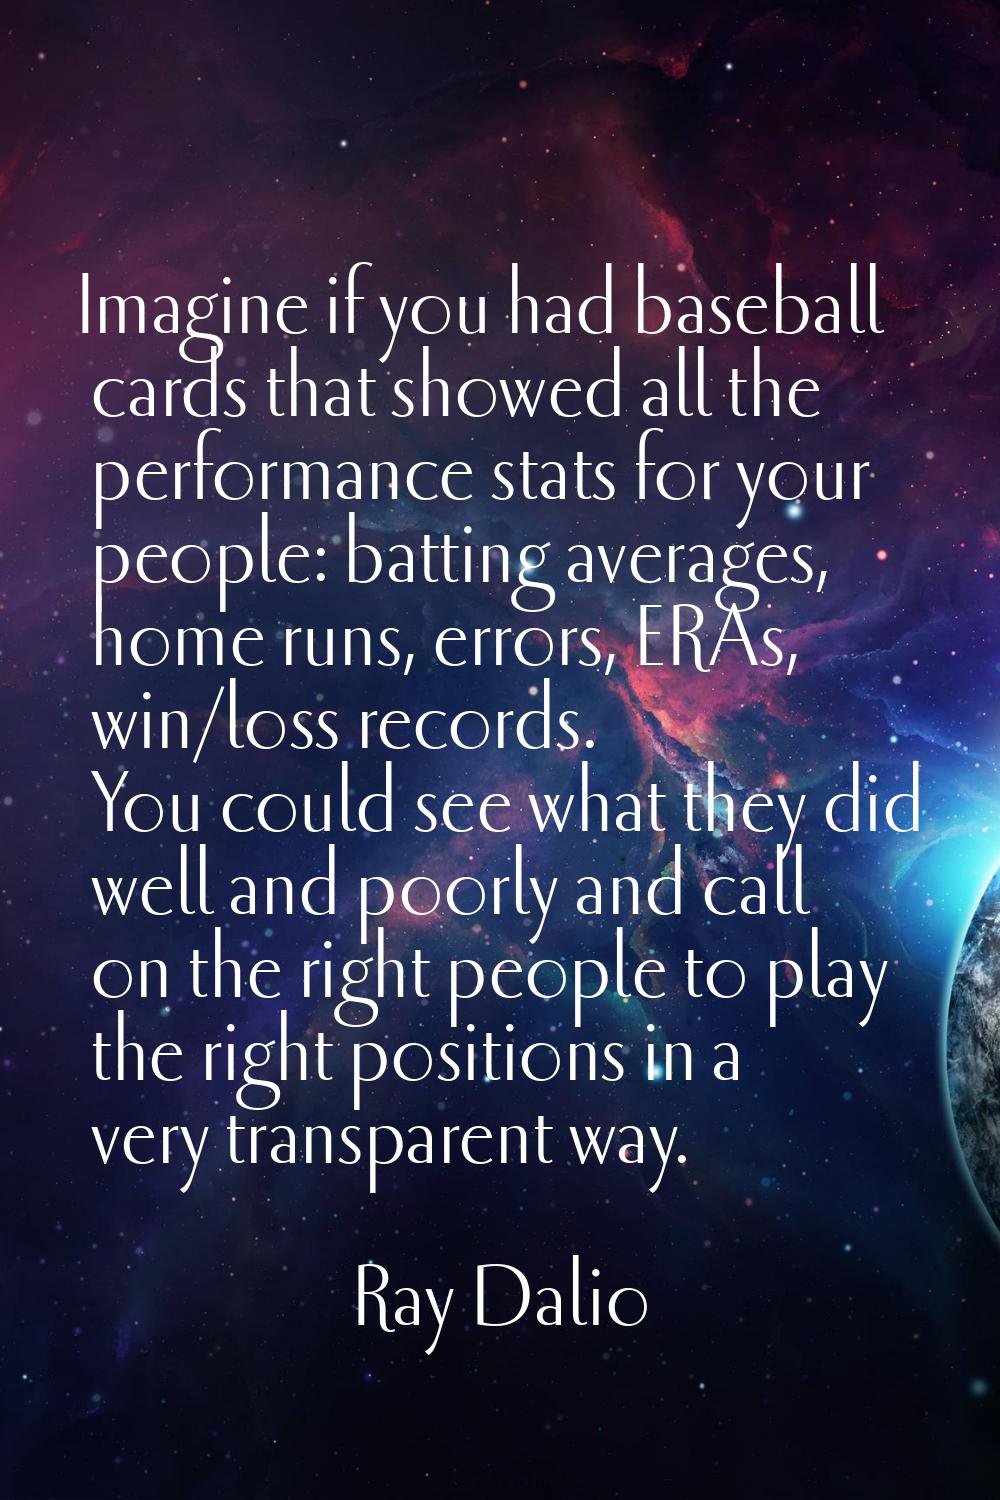 Imagine if you had baseball cards that showed all the performance stats for your people: batting av